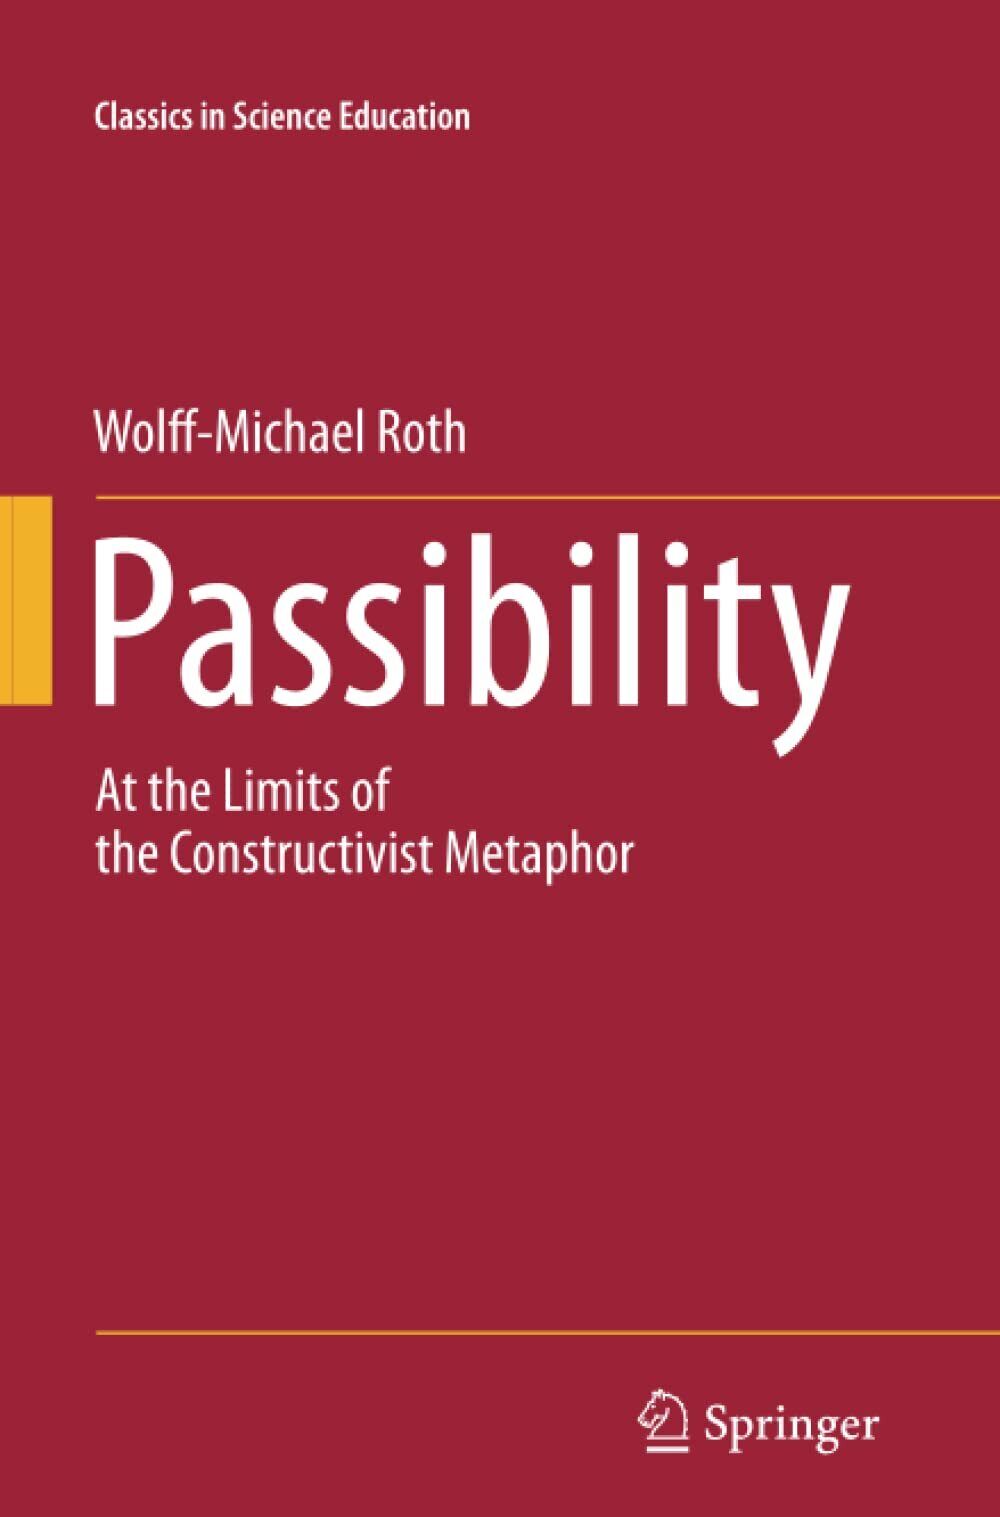 Passibility - Wolff-Michael Roth - Springer, 2013